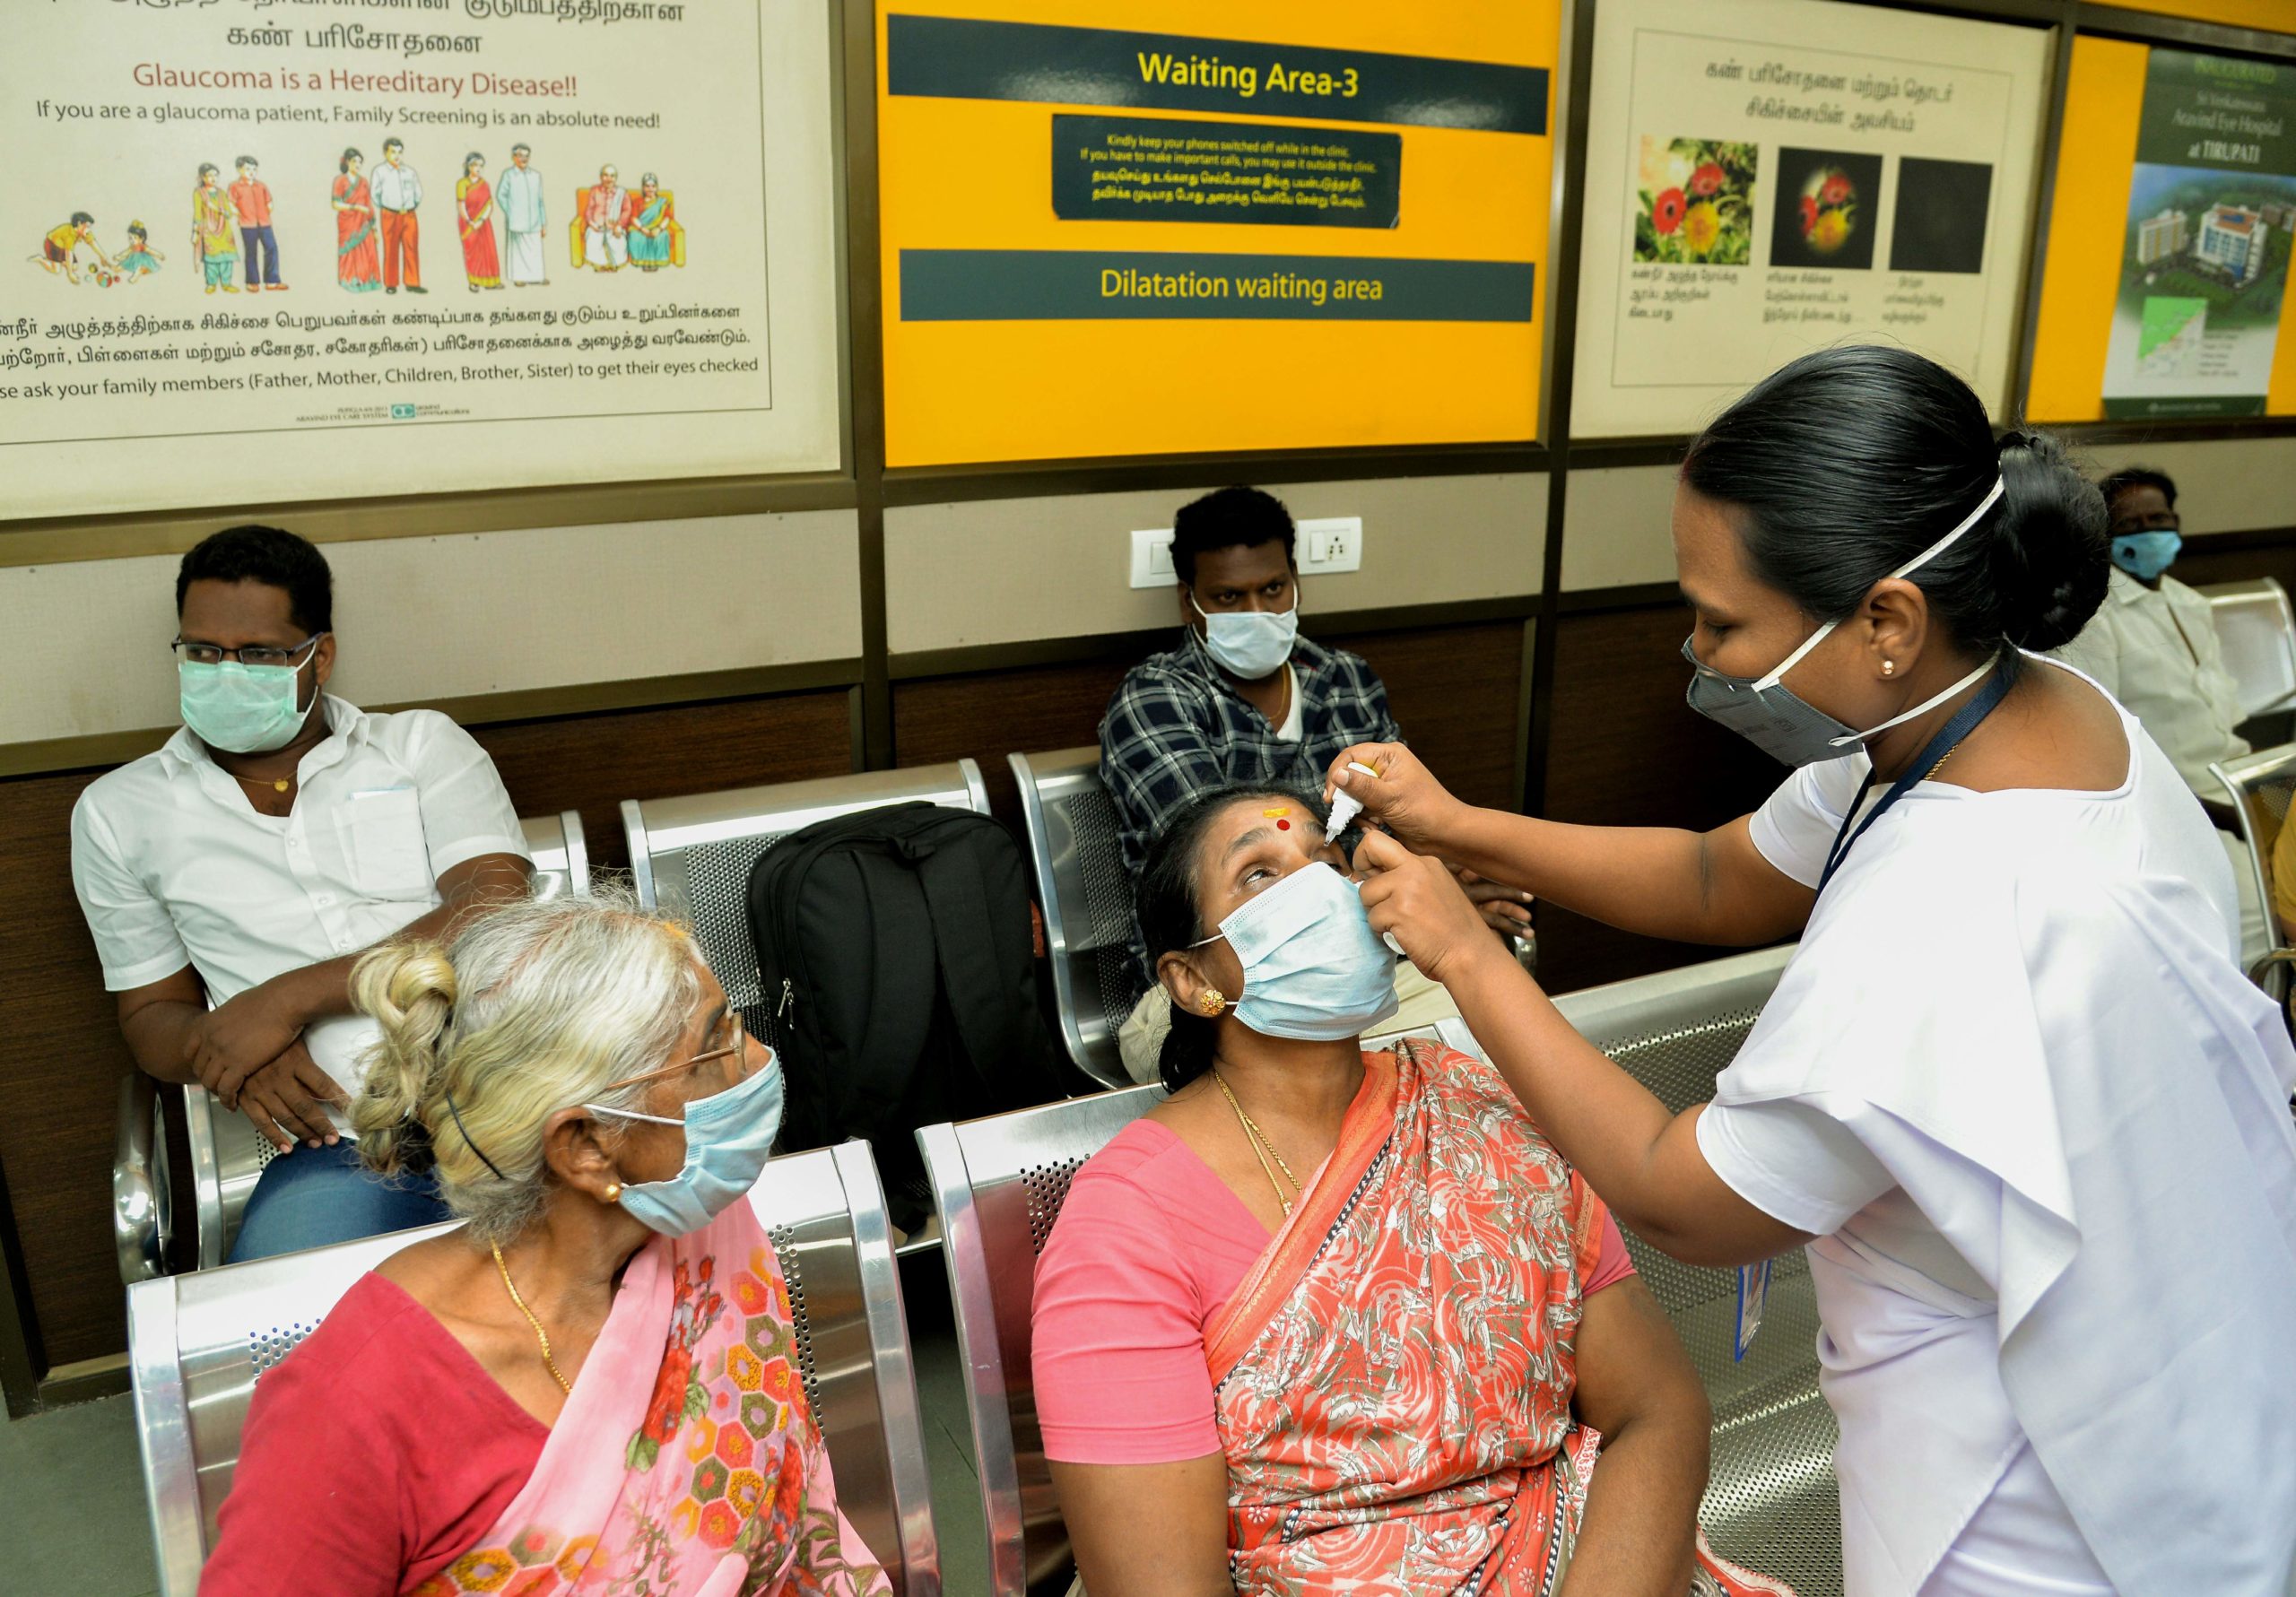 Teaching patient with glaucoma how to instill eye drops, Madurai, India. Photo Credit: ARAVIND EYE CARE SYSTEM